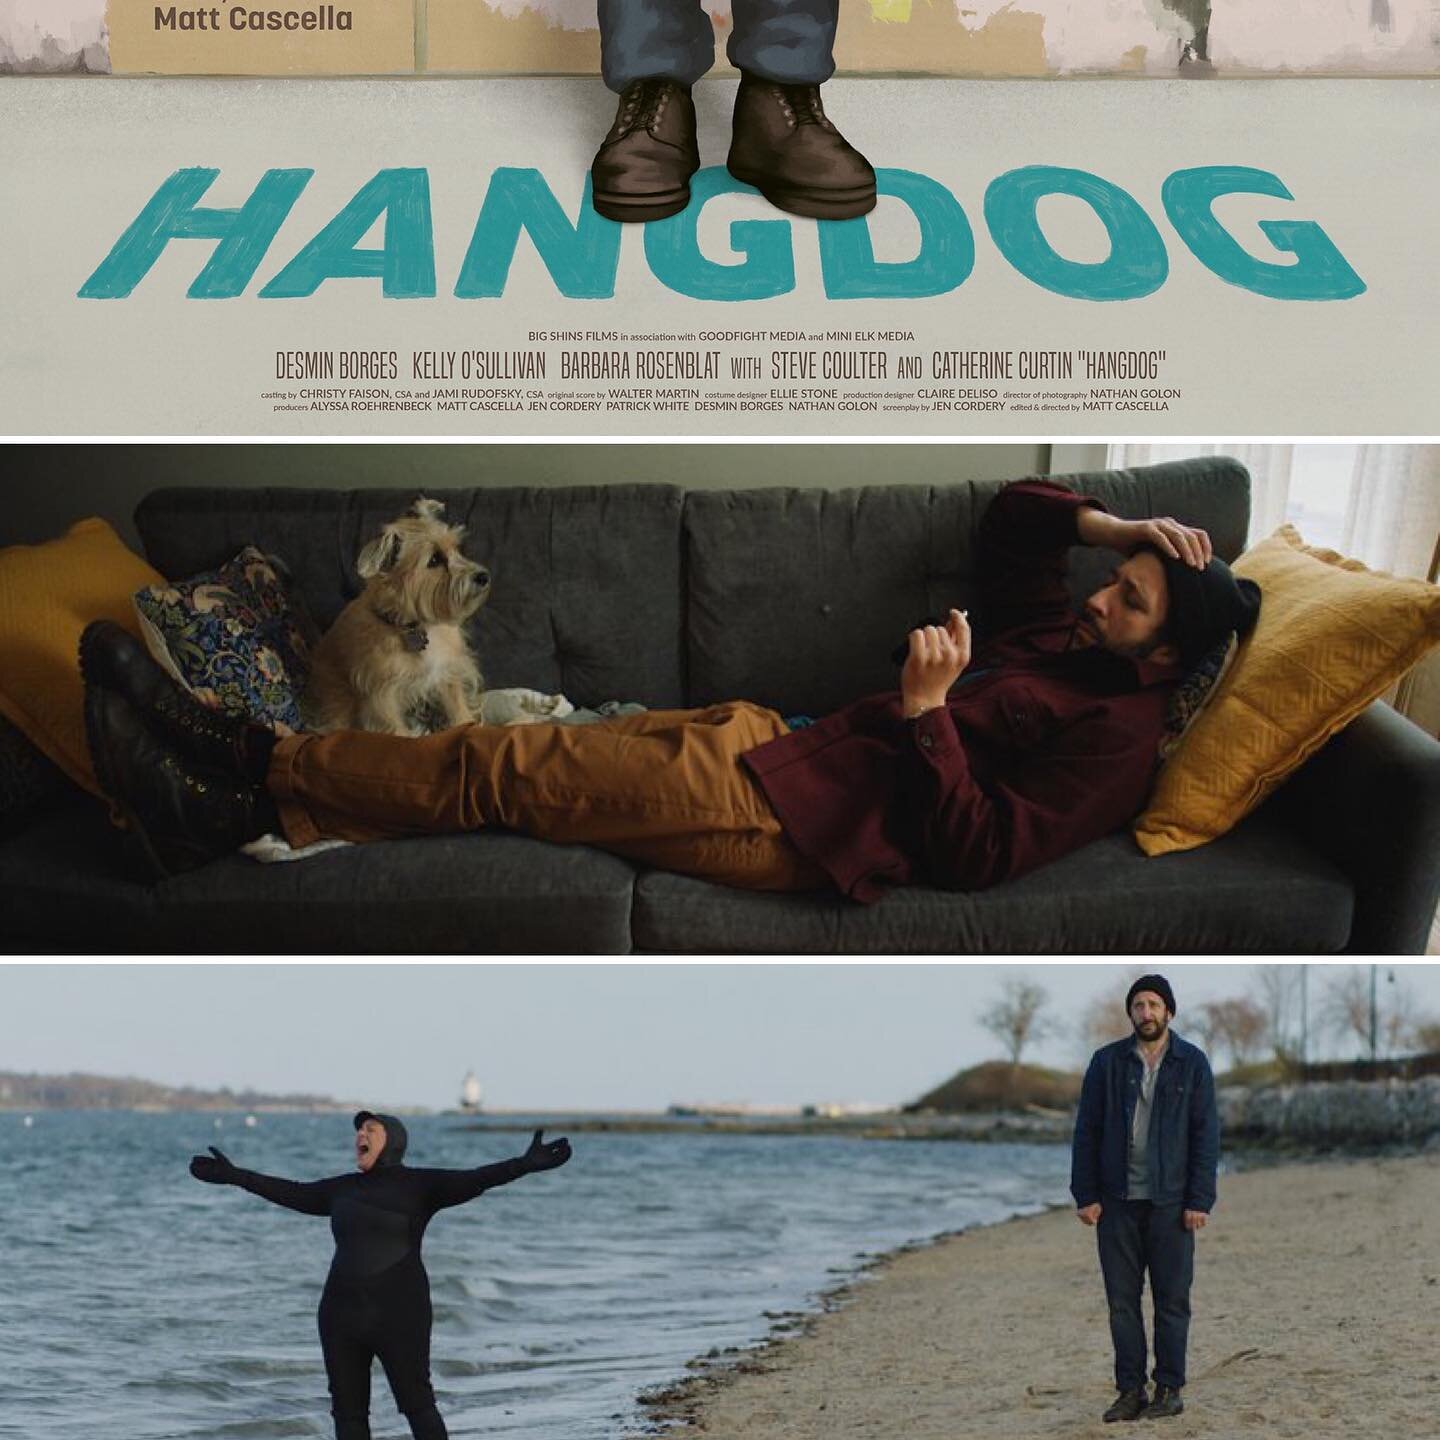 New post is up! The newest article is a story review from our newest contributor, Pamela, about the film Hangdog! Check it out at the link in our bio
&bull;
@hangdogmovie is screening this week as the opening night film at Maine International Film Fe